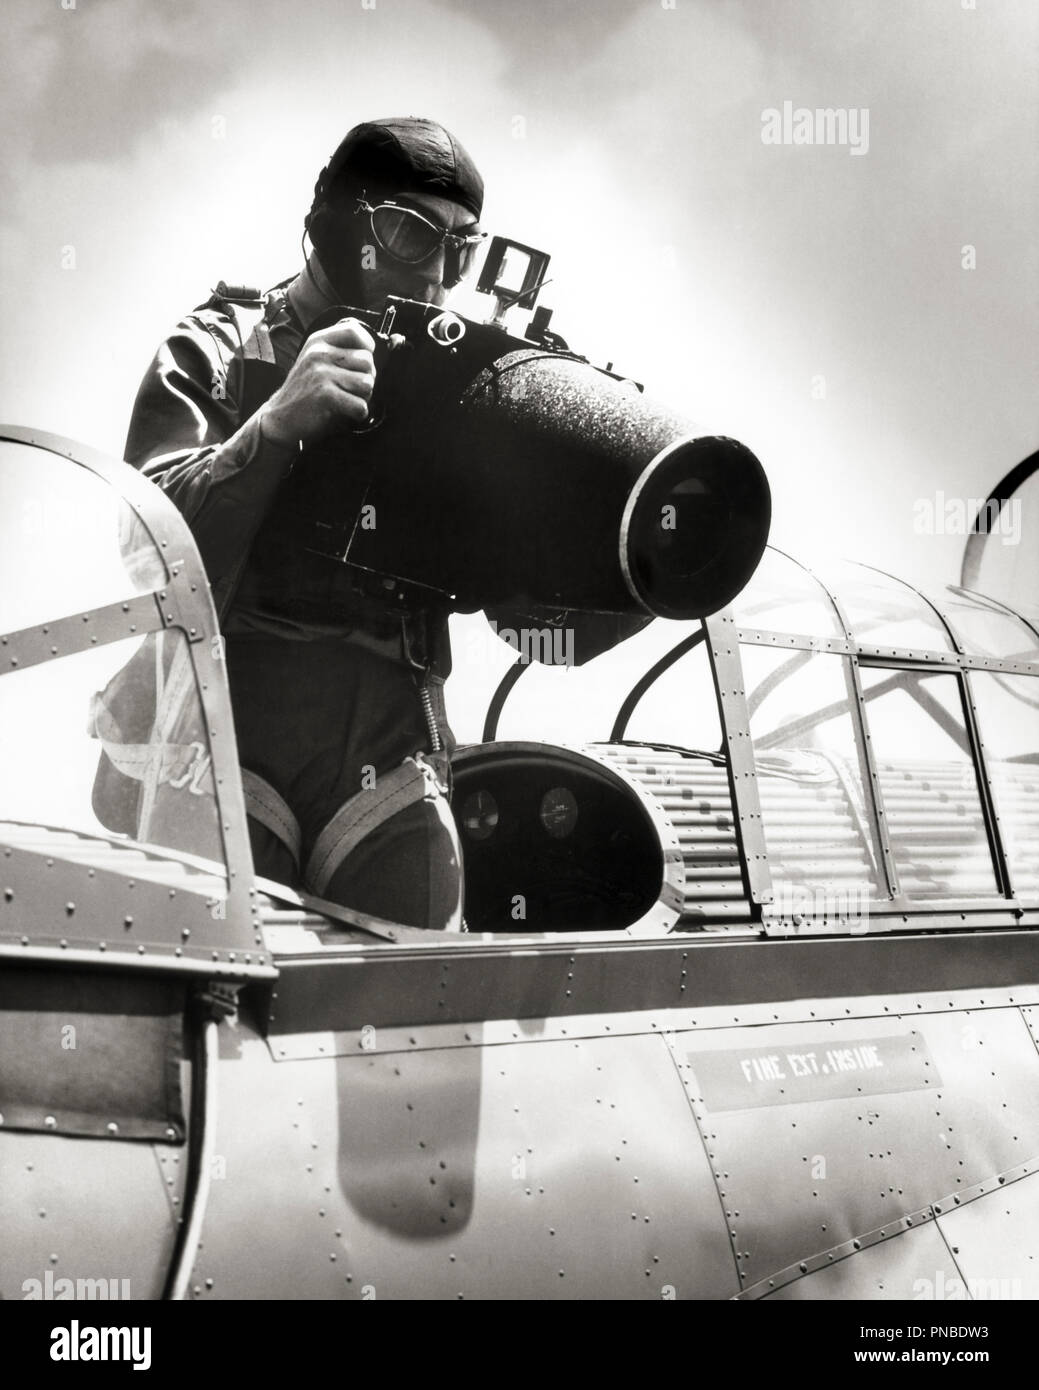 1940s-anonymous-man-photographer-with-large-aerial-camera-used-by-us-air-force-for-reconnaissance-and-map-making-a1343-har001-hars-and-world-wars-world-war-world-war-two-world-war-ii-occupations-uniforms-high-tech-used-aviator-reconnaissance-world-war-2-us-army-anonymous-air-corps-black-and-white-har001-old-fashioned-PNBDW3.jpg